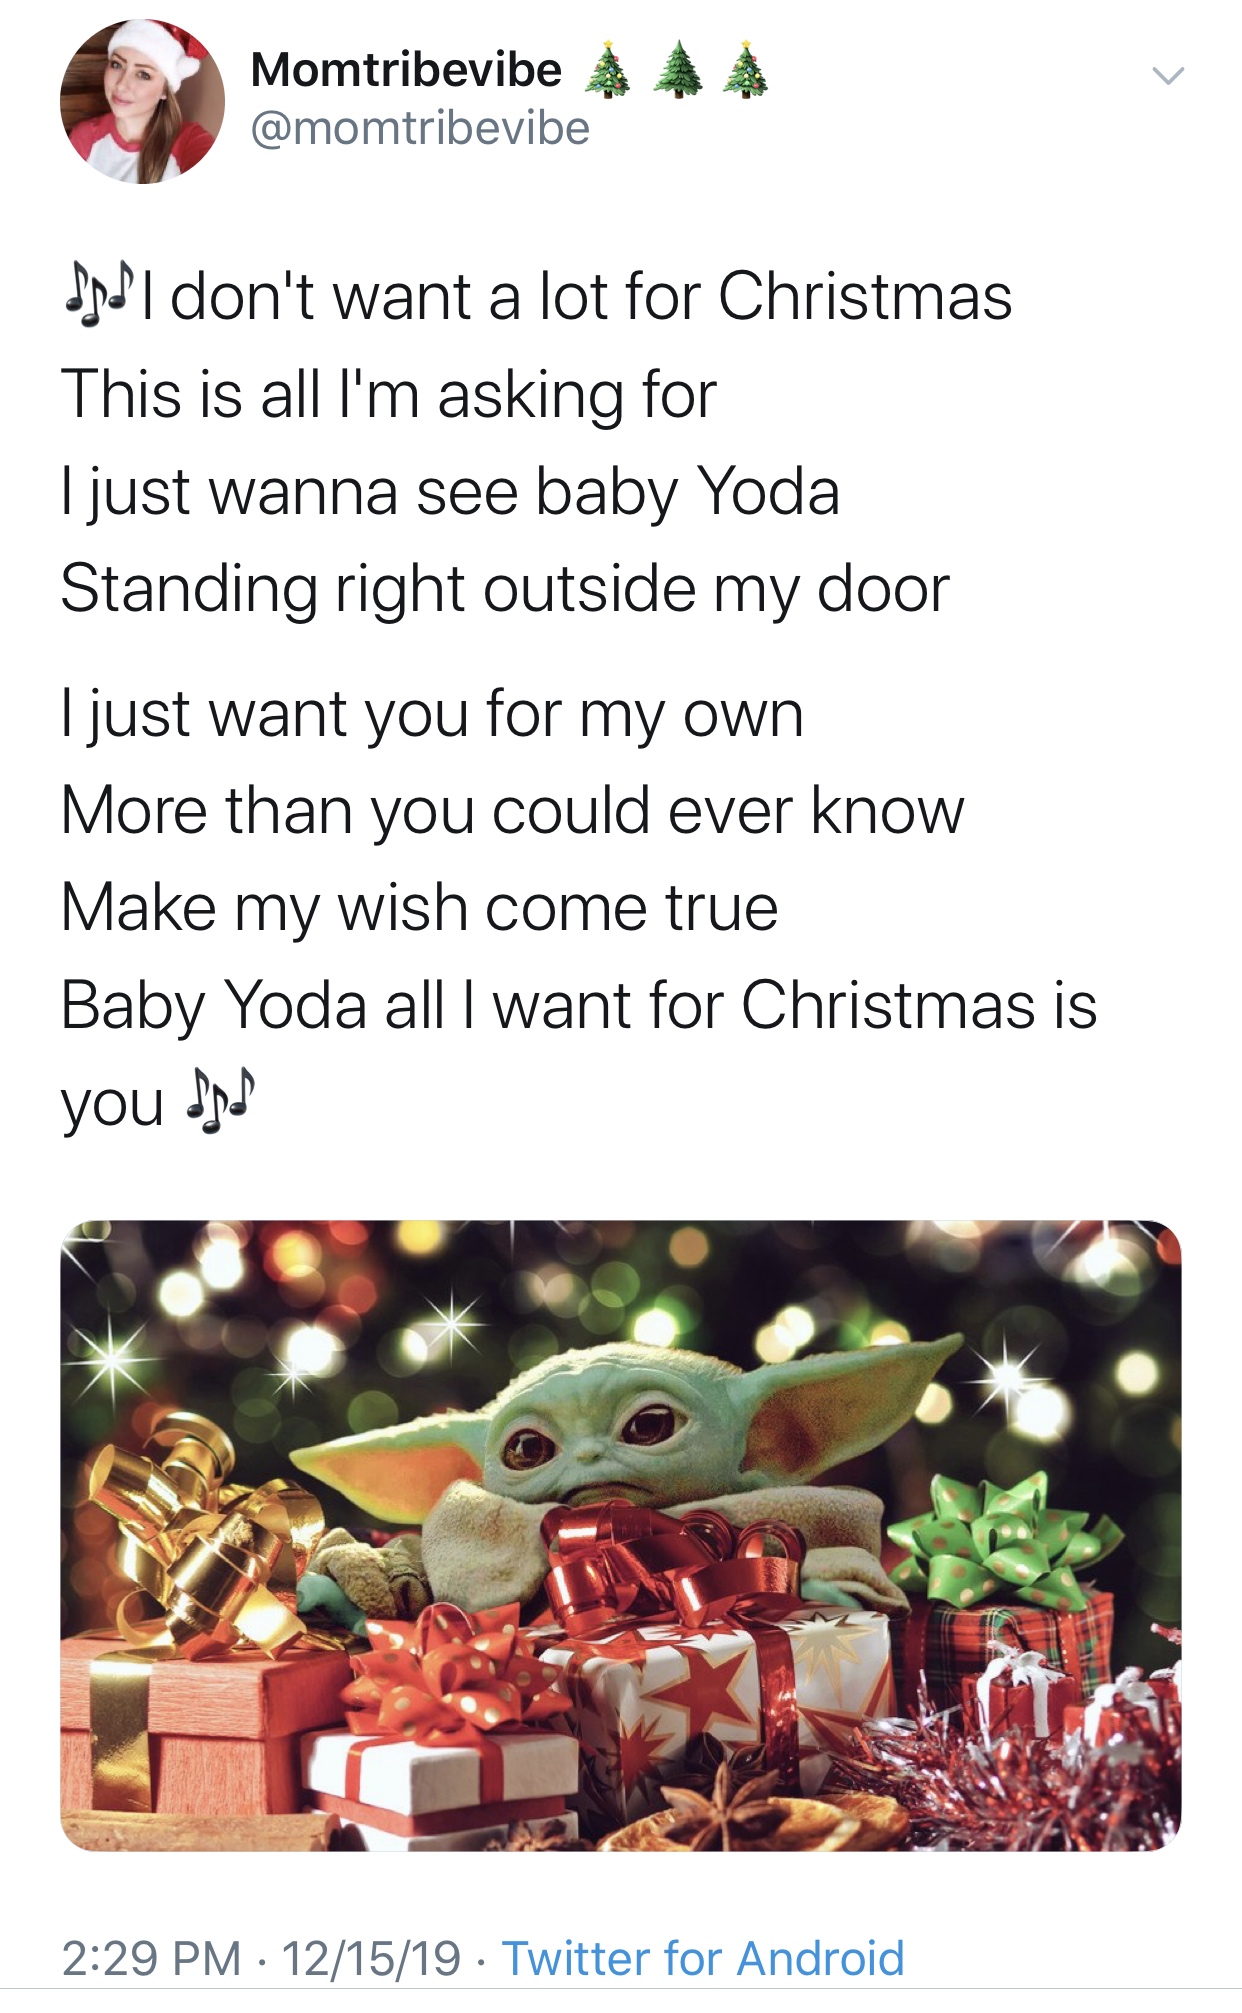 baby yoda christmas - Momtribevibe 4 4 4 Ini don't want a lot for Christmas This is all I'm asking for I just wanna see baby Yoda Standing right outside my door I just want you for my own More than you could ever know Make my wish come true Baby Yoda all 